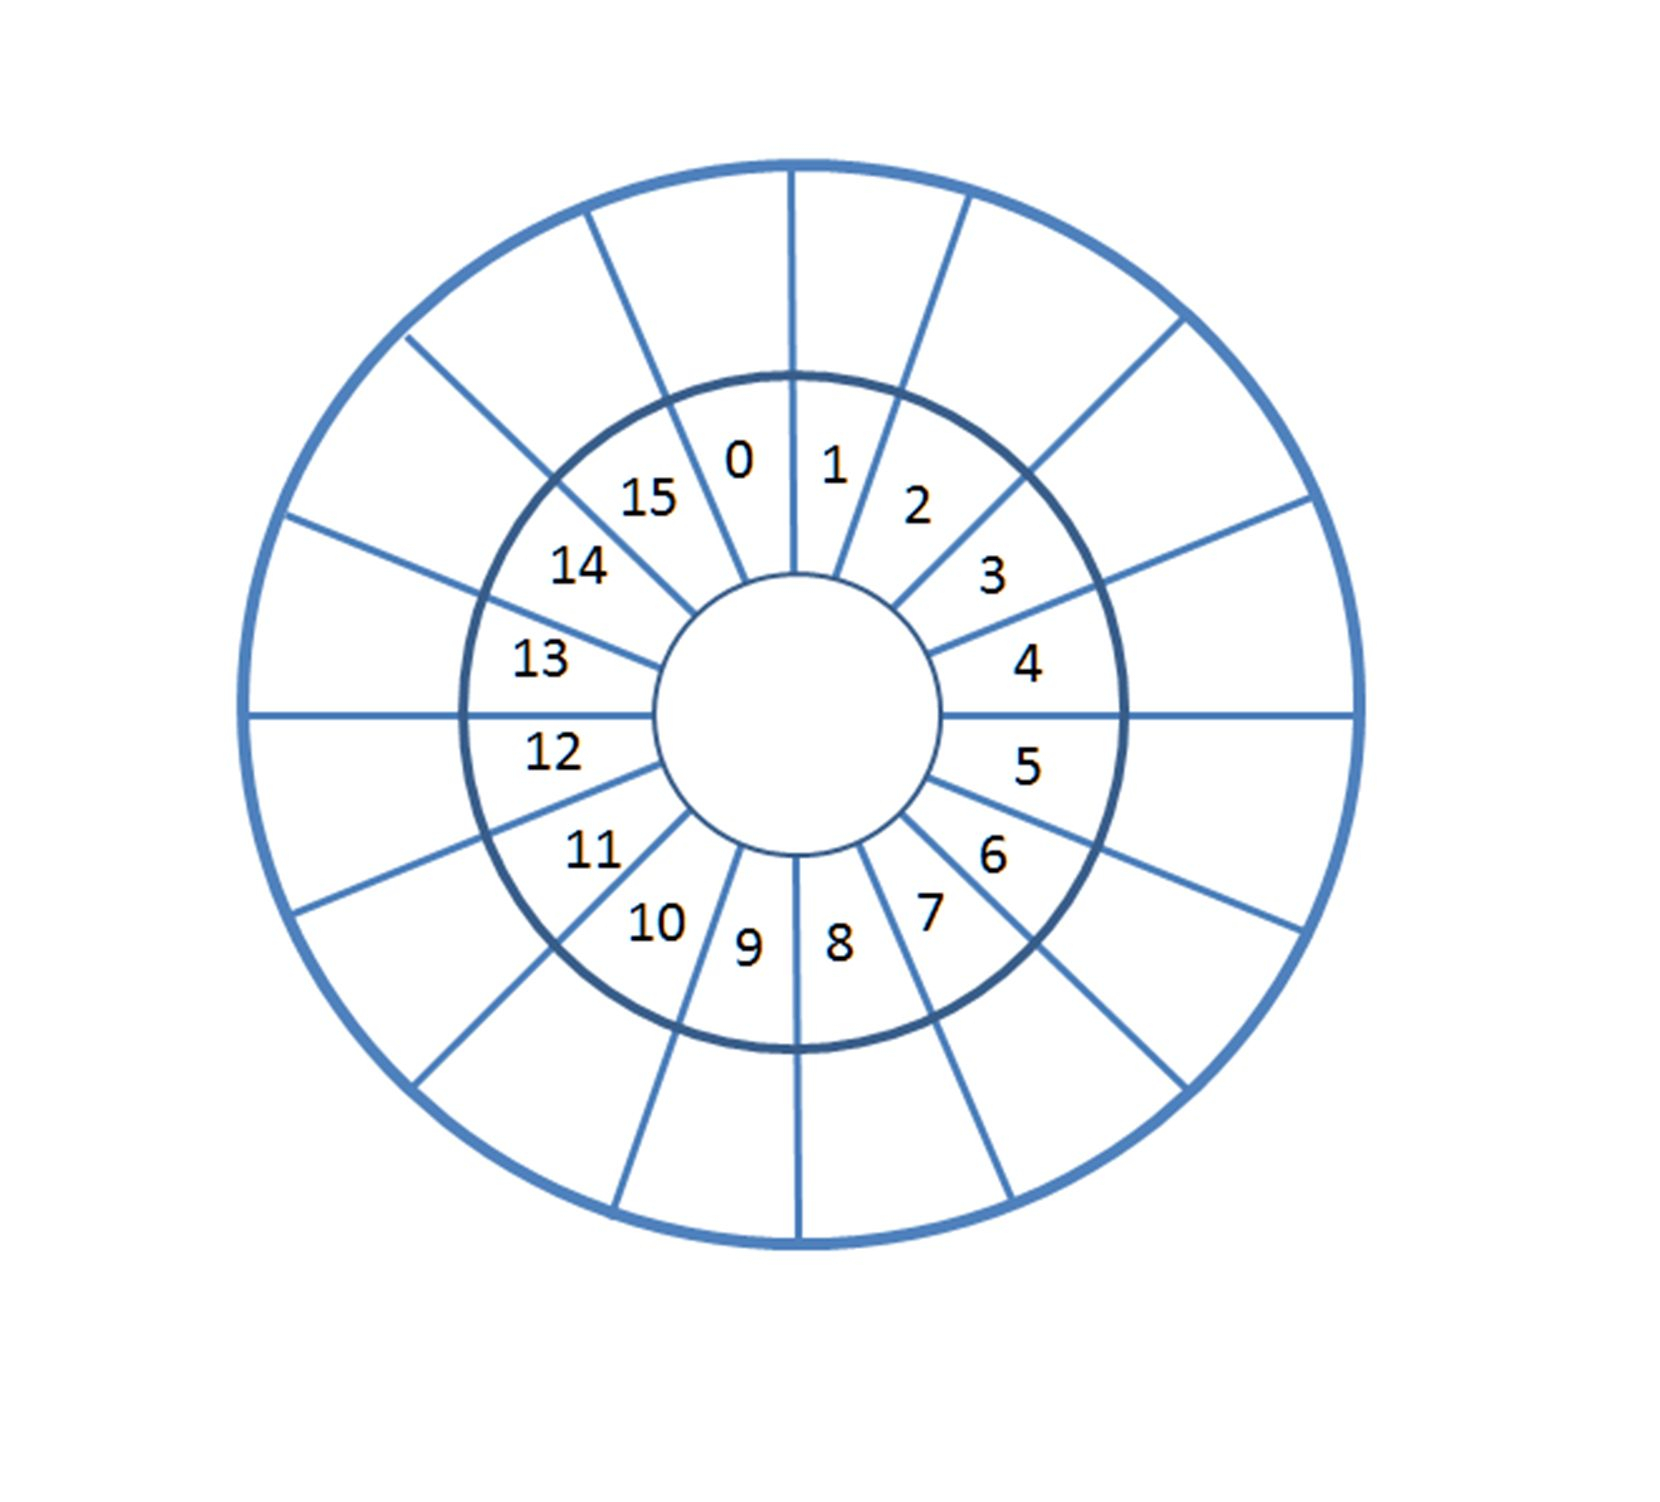 Multiplication Wheel Up To 15 Classical Conversations 